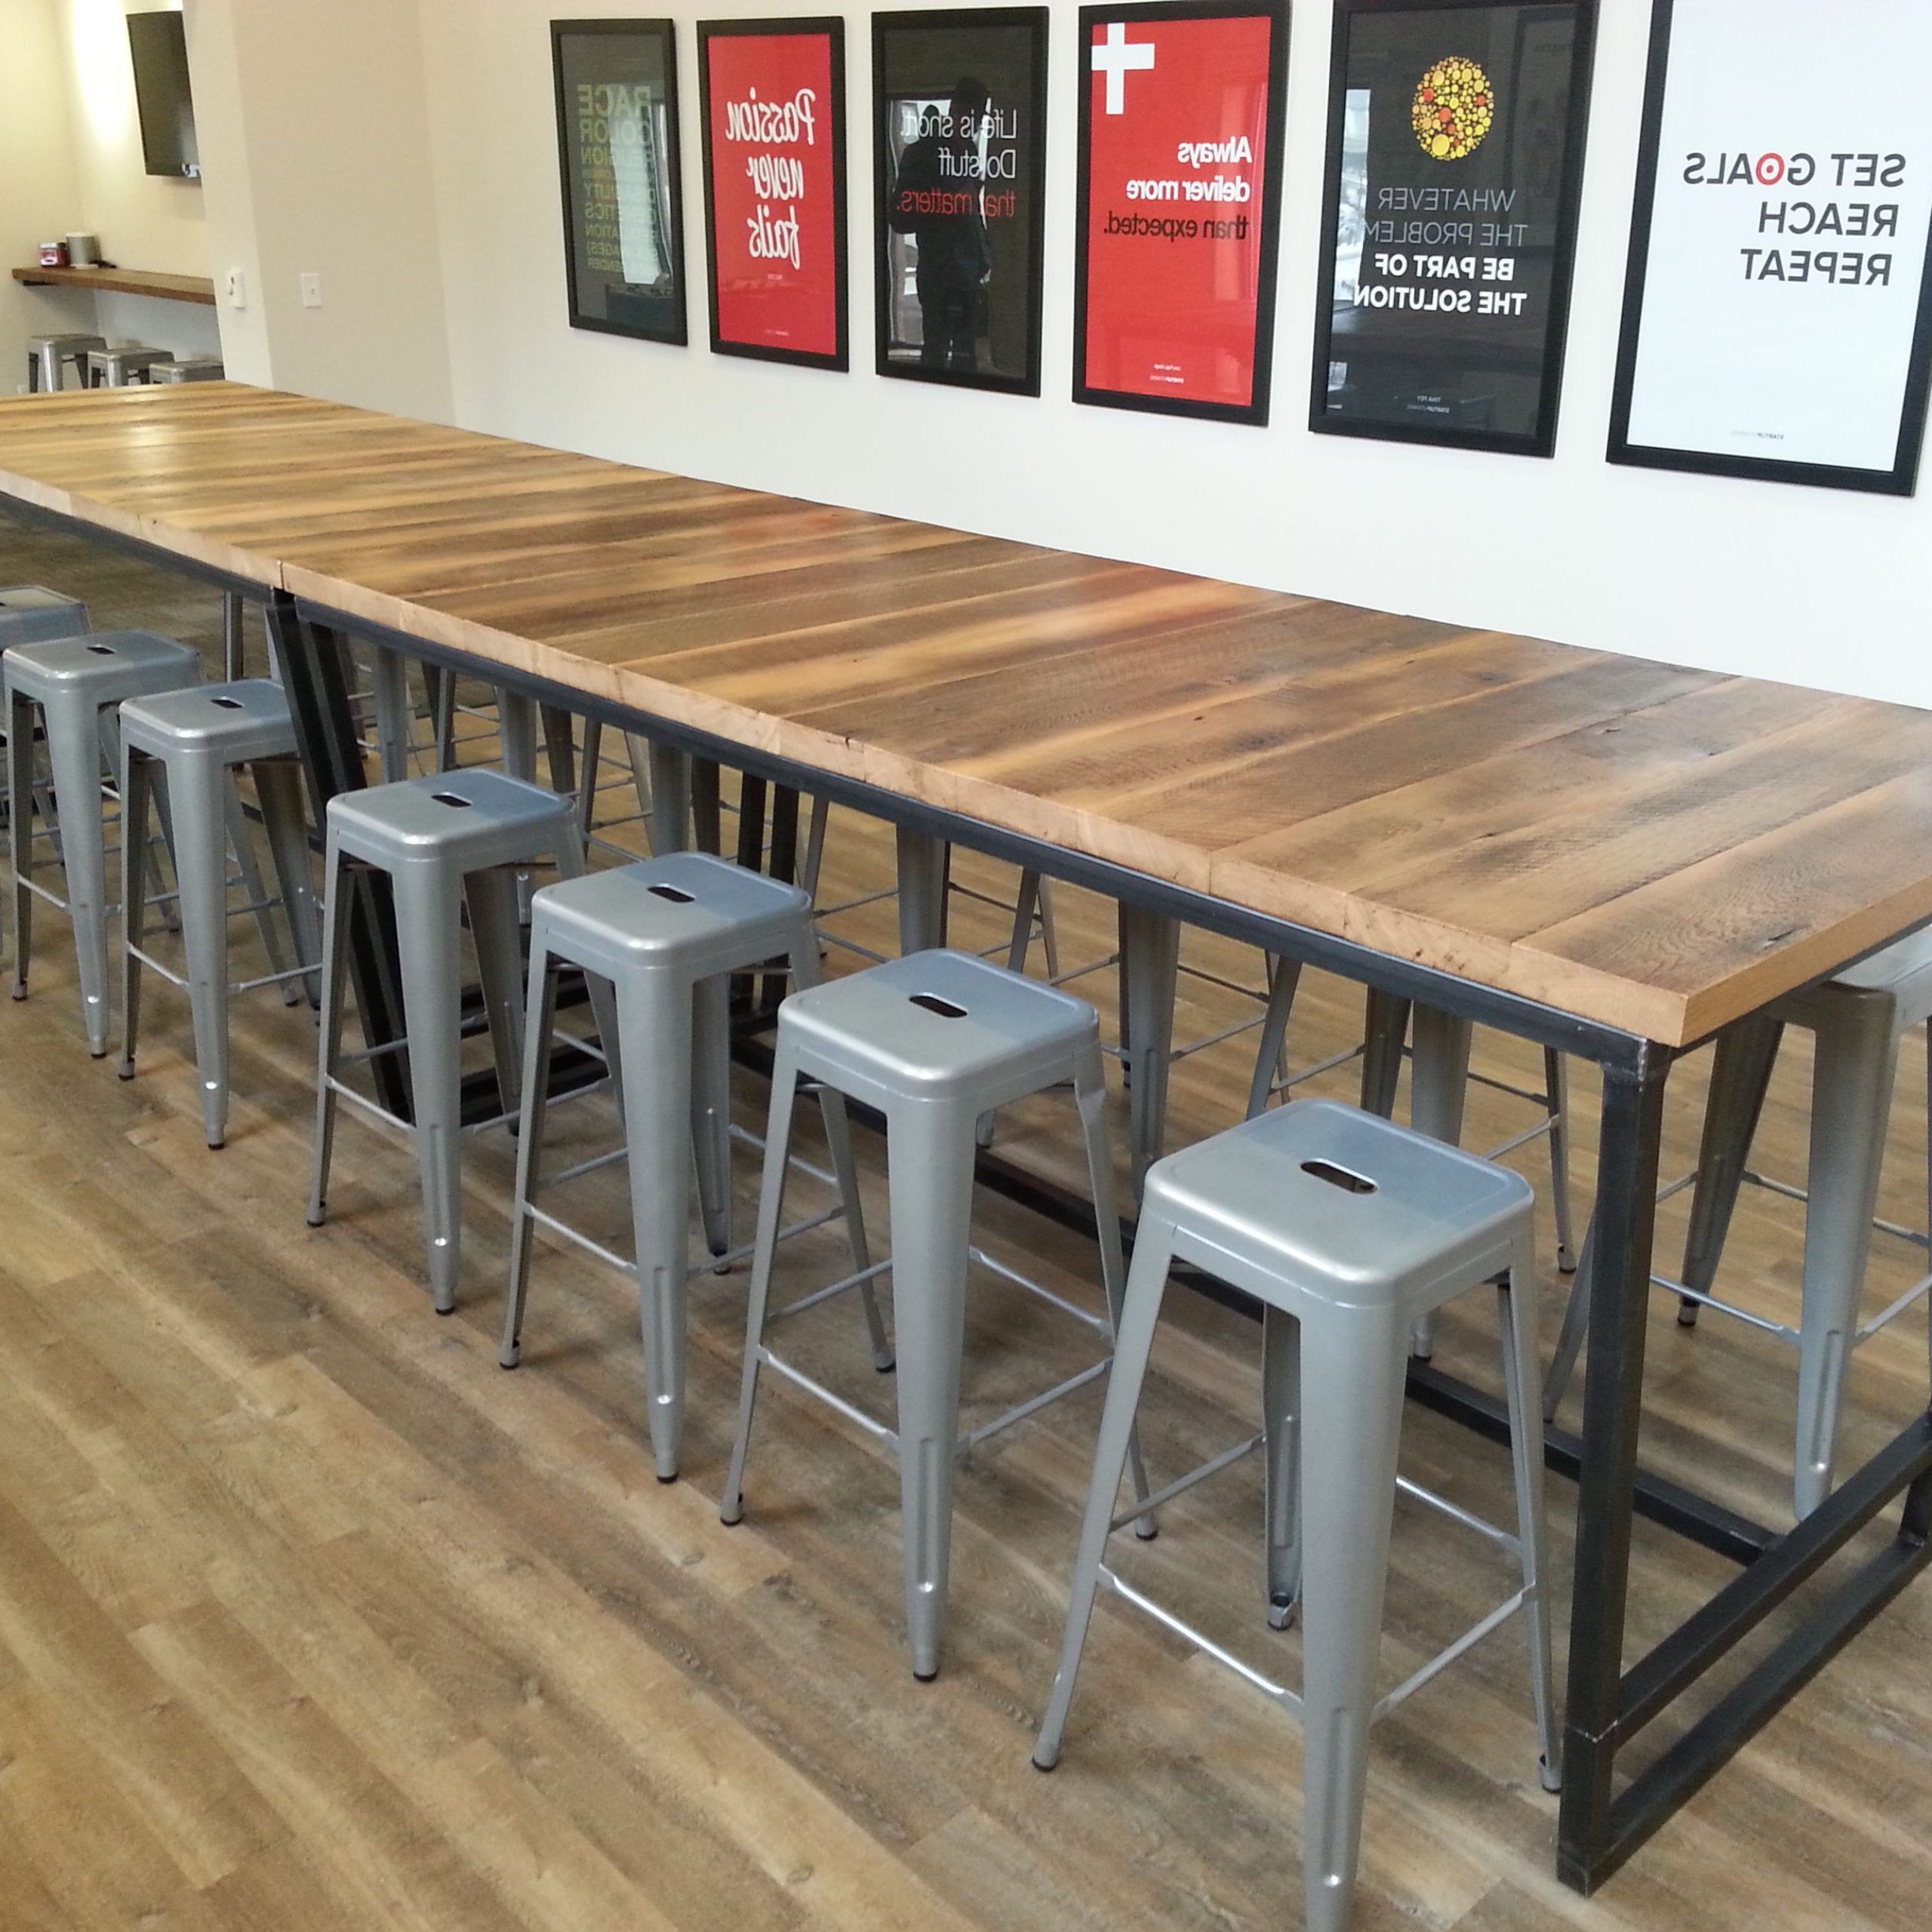 Griffin Reclaimed Wood Bar Height Tables Throughout 2019 Famous Reclaimed Wood High Table #lv83 – Advancedmassagebysara (View 23 of 25)